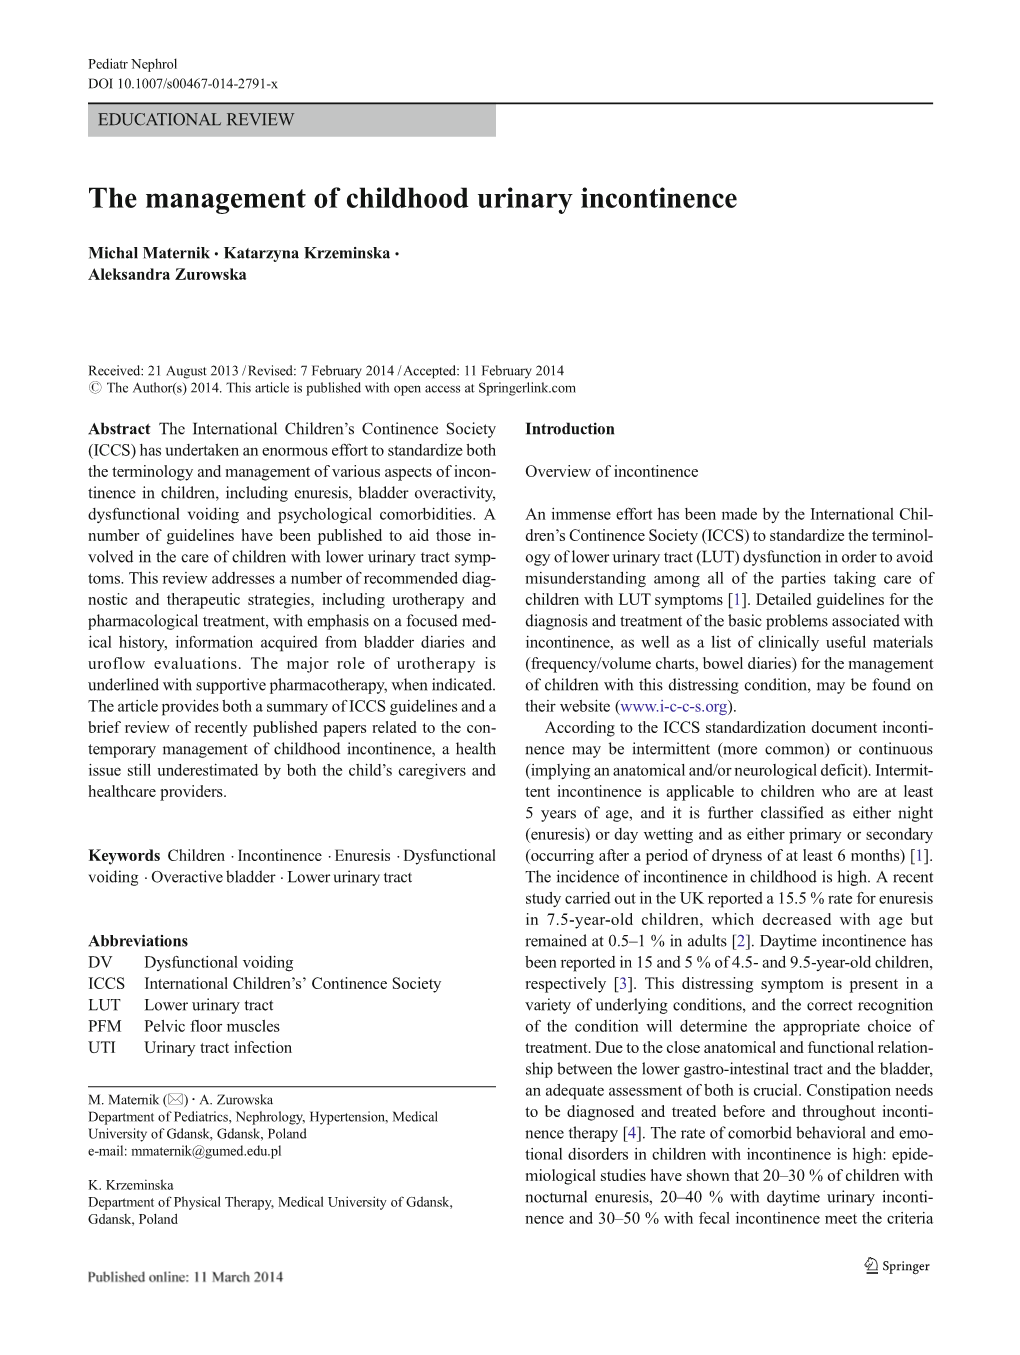 The Management of Childhood Urinary Incontinence